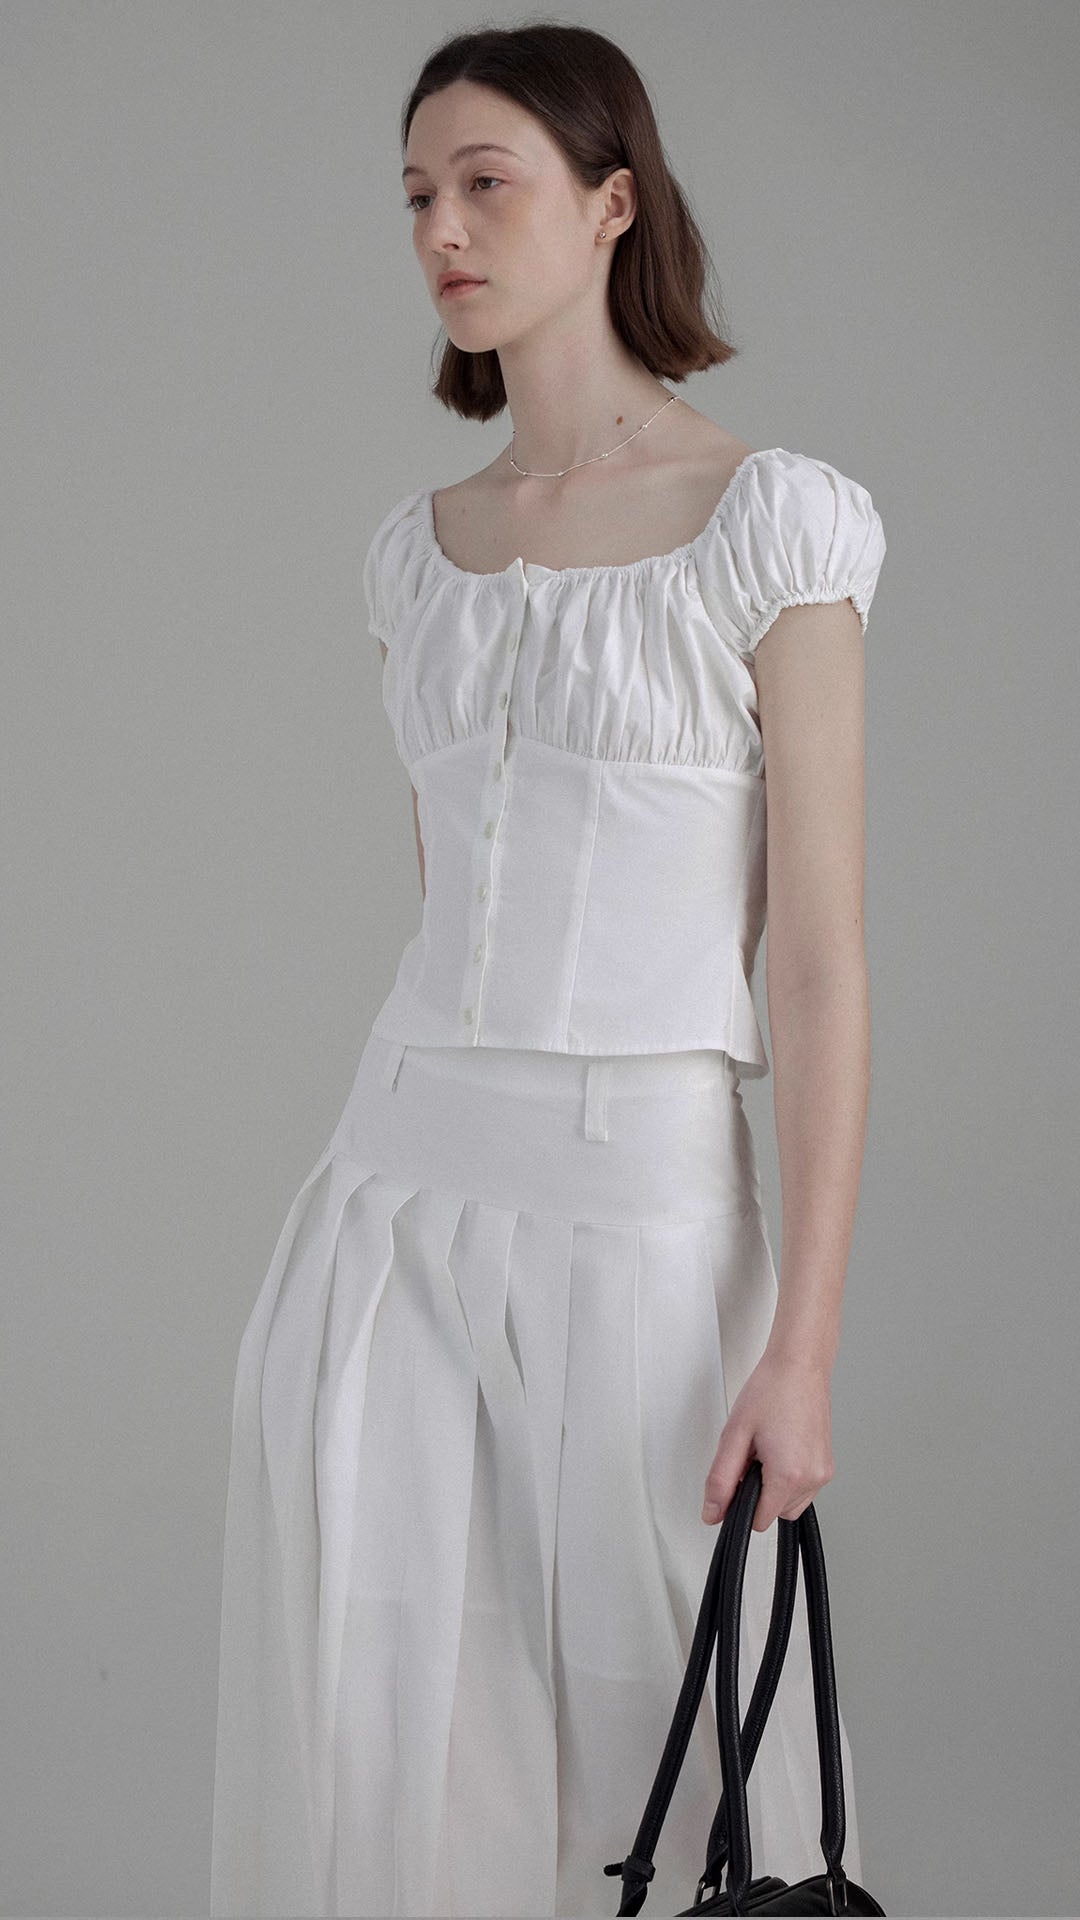 Vintage High Waist solid white Pleated Skirt / top